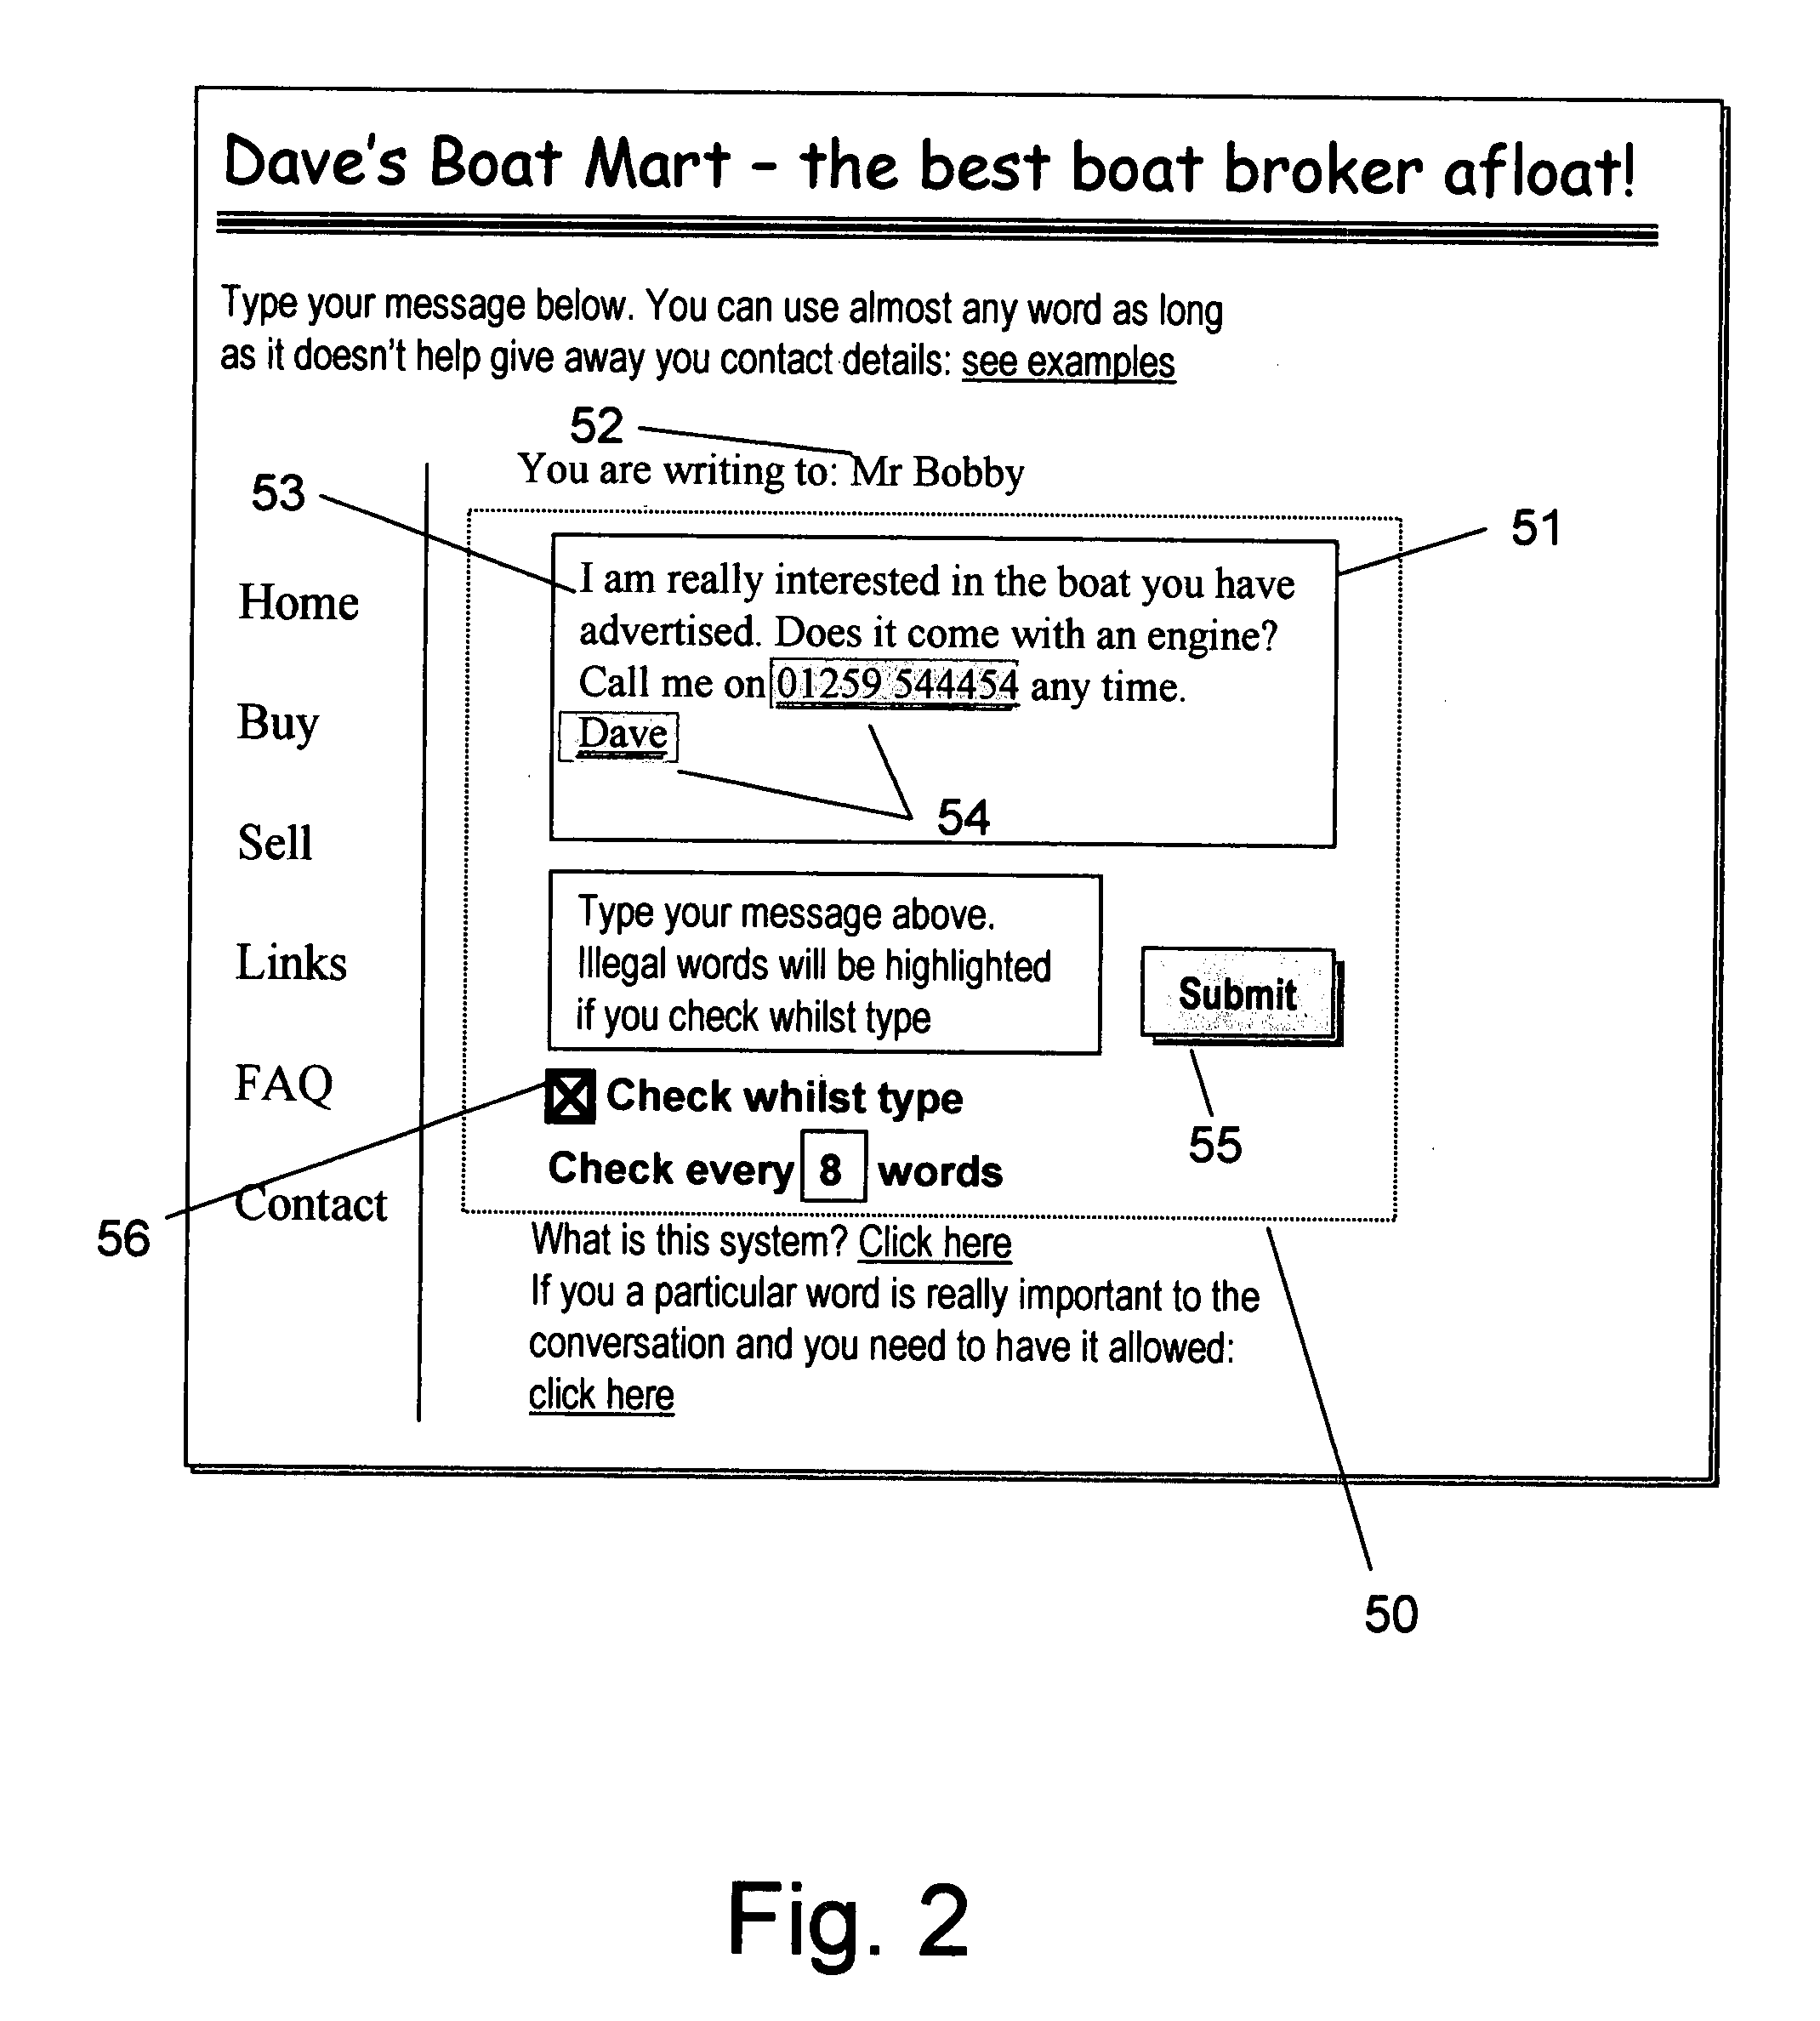 Method for allowing exchange of permissible information between users in a hosting website